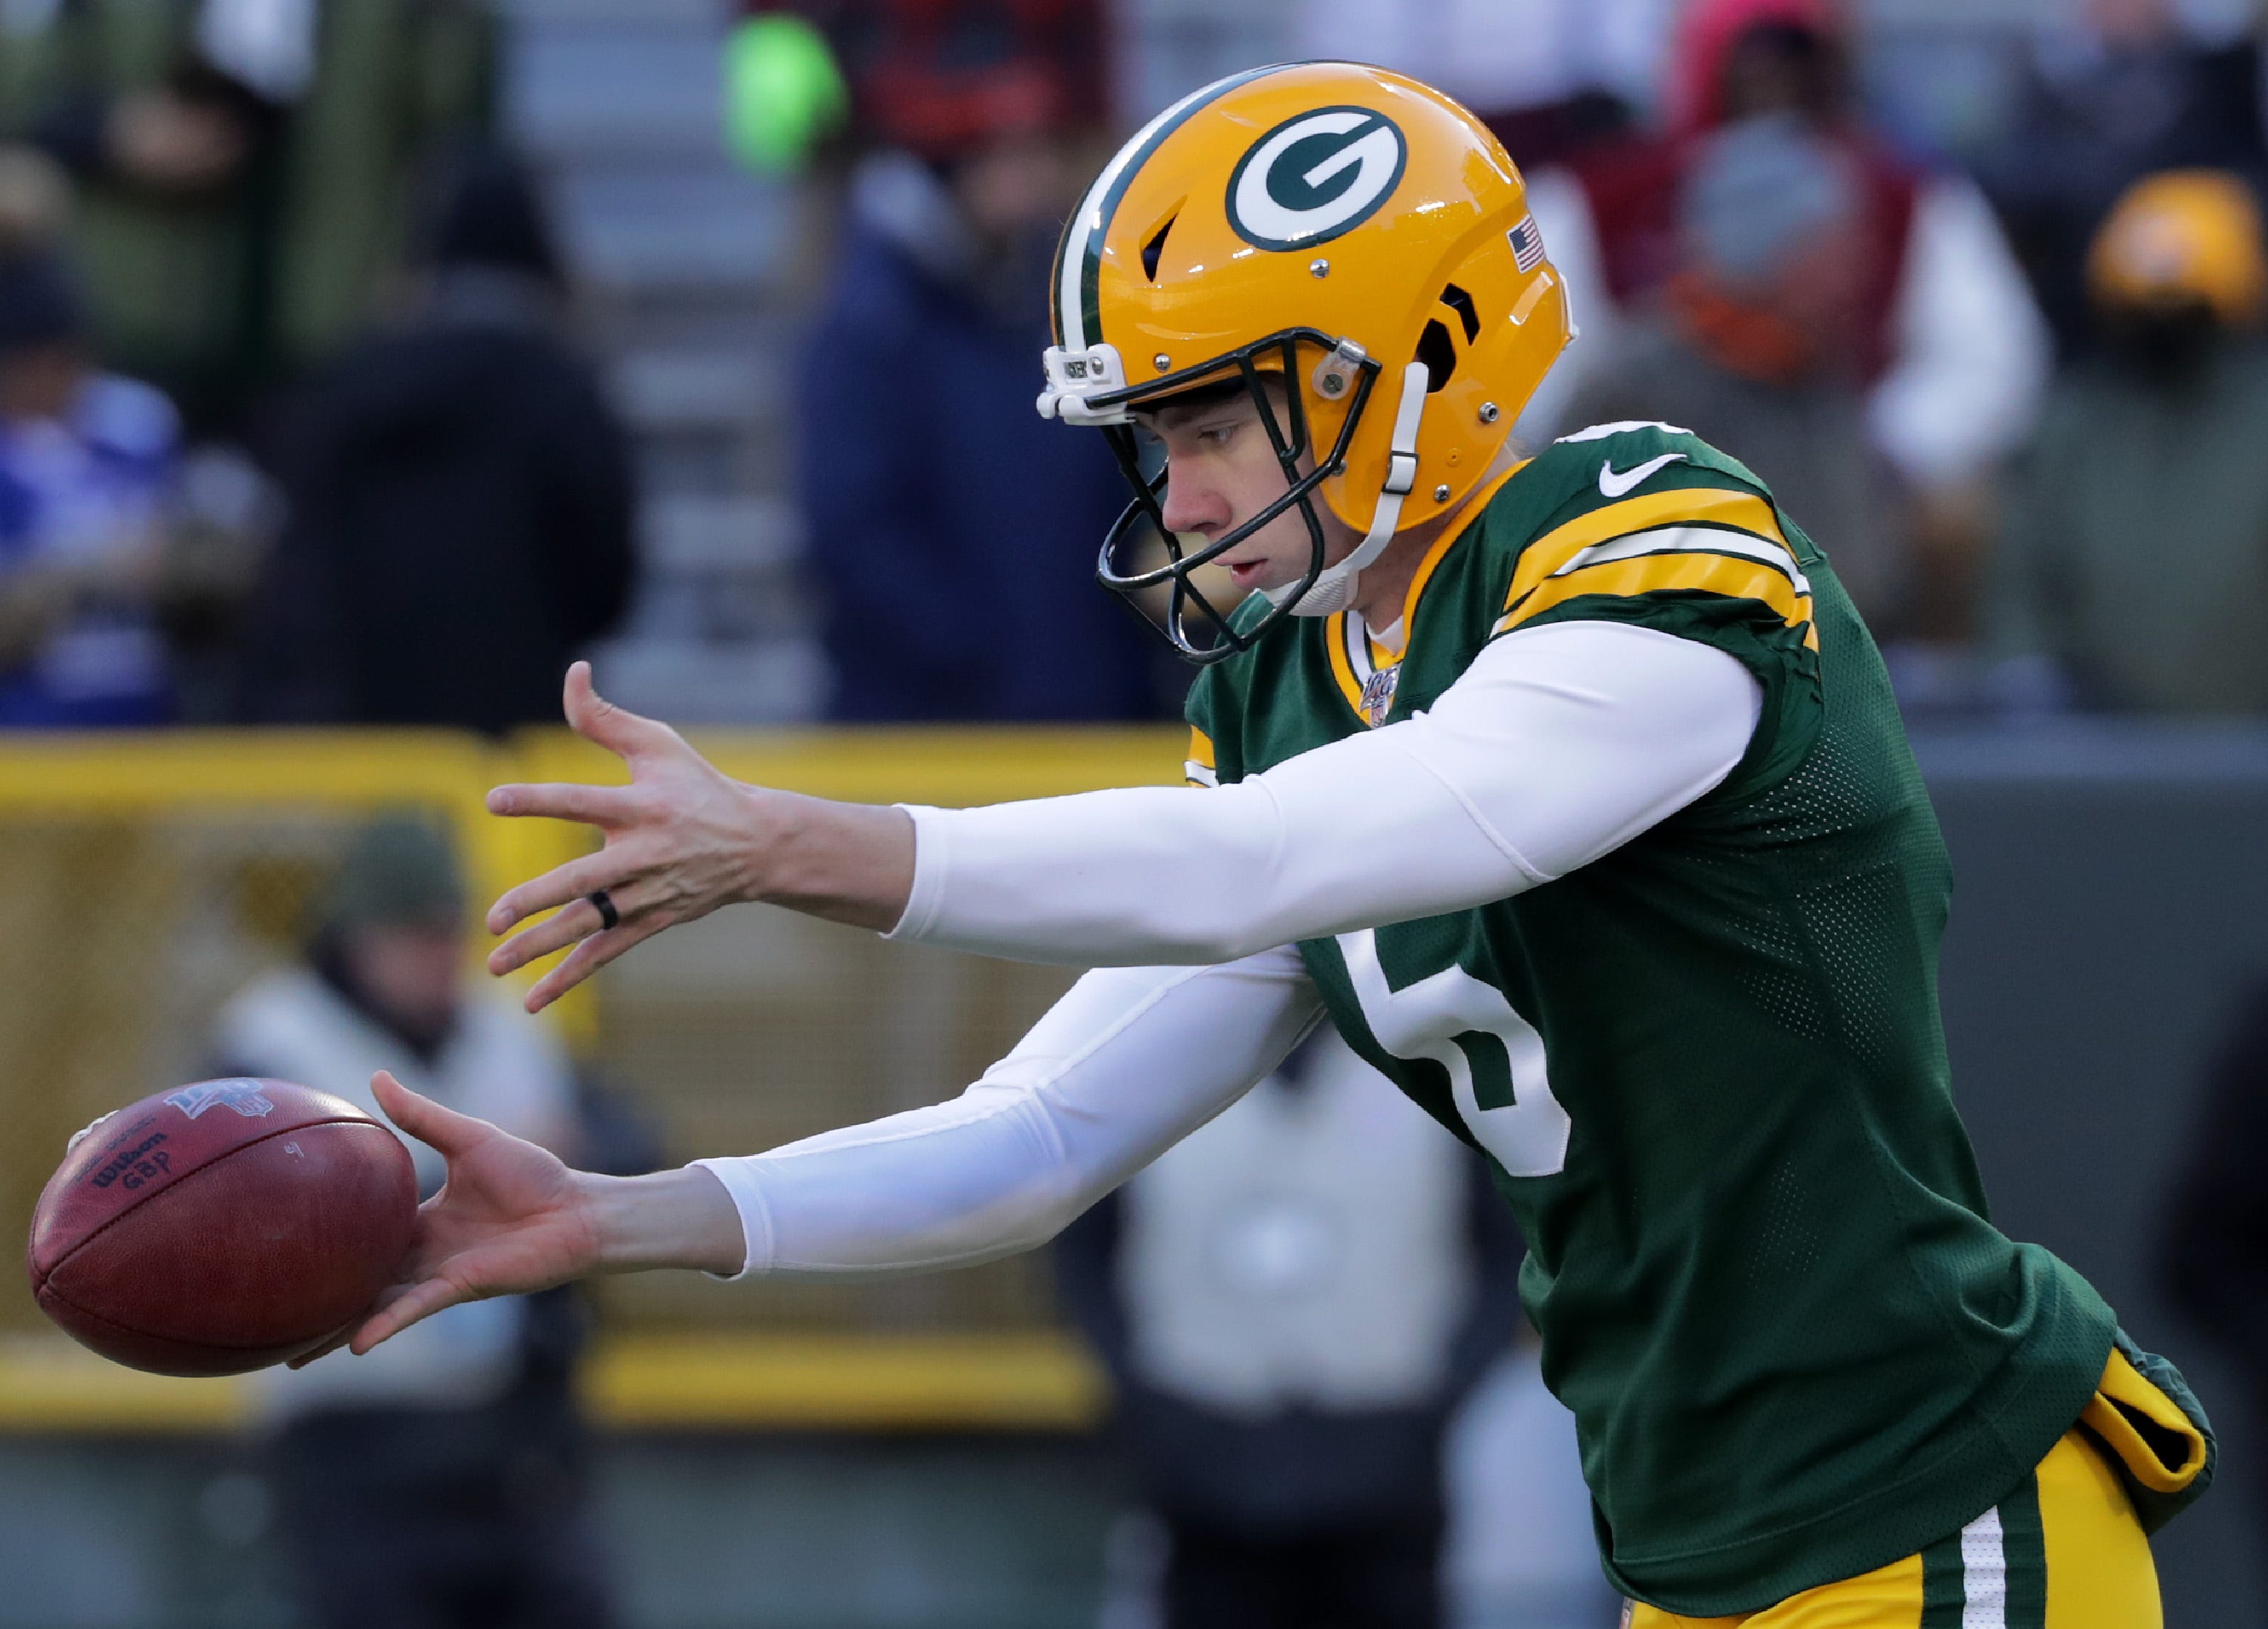 Green Bay Packers kicker JK Scott (6) warms up before the Packers host the Chicago Bears on Sunday, December 15, 2019, at Lambeau Field in Green Bay, Wis.